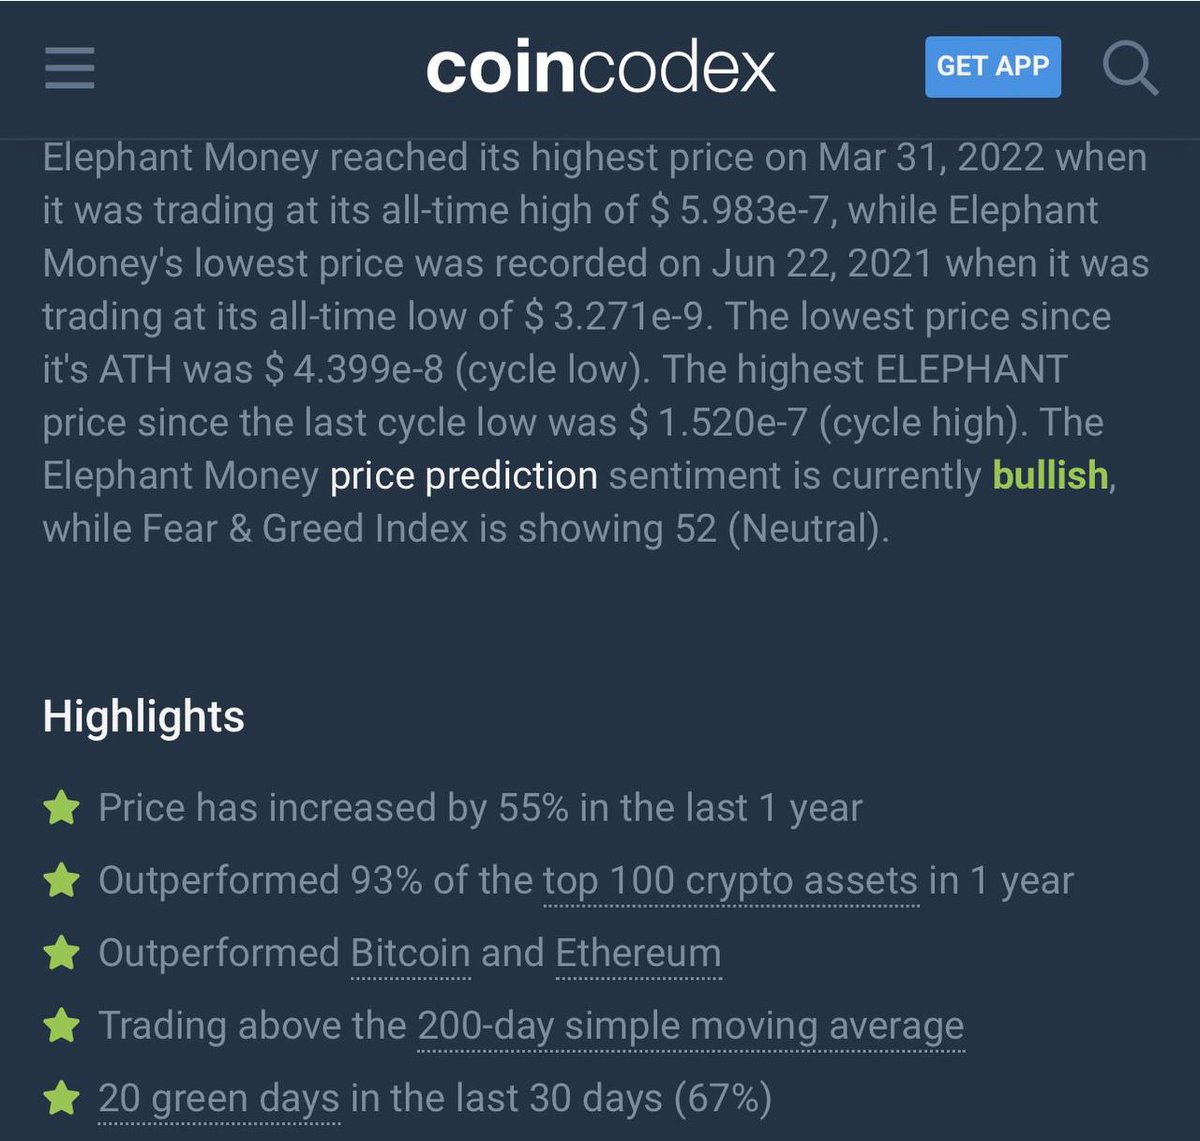 Are you only listening to people like @BTC_Archive @maxkeiser @saylor @JasonPLowery and follow memes like #Covfefe and #PepeCoin  ??? Then you're missing out big time on the only real #DeFi #Moonshot which is #ElephantMoney =&gt; go check it out on https://t.co/aJAIR88QIe 